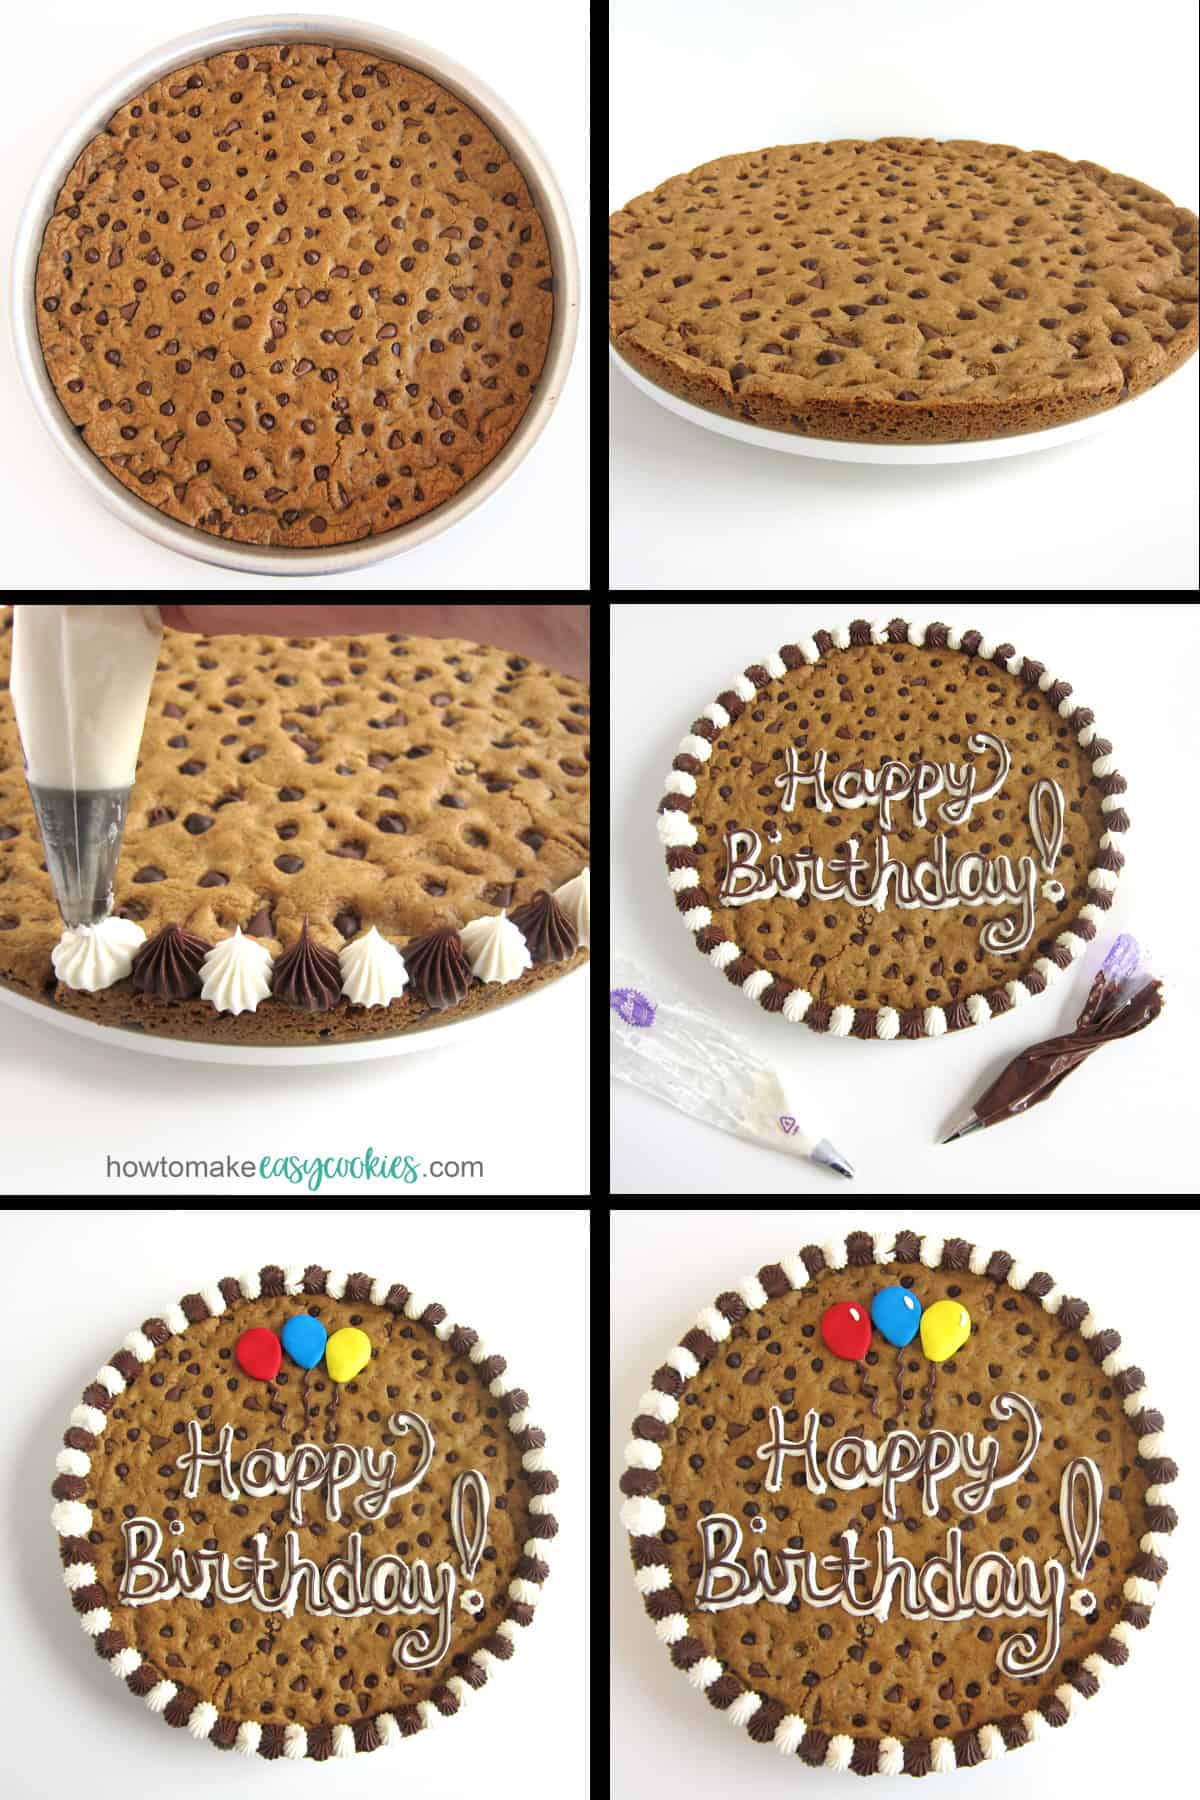 decorate a chocolate chip cookie cake for a birthday using chocolate and vanilla frosting